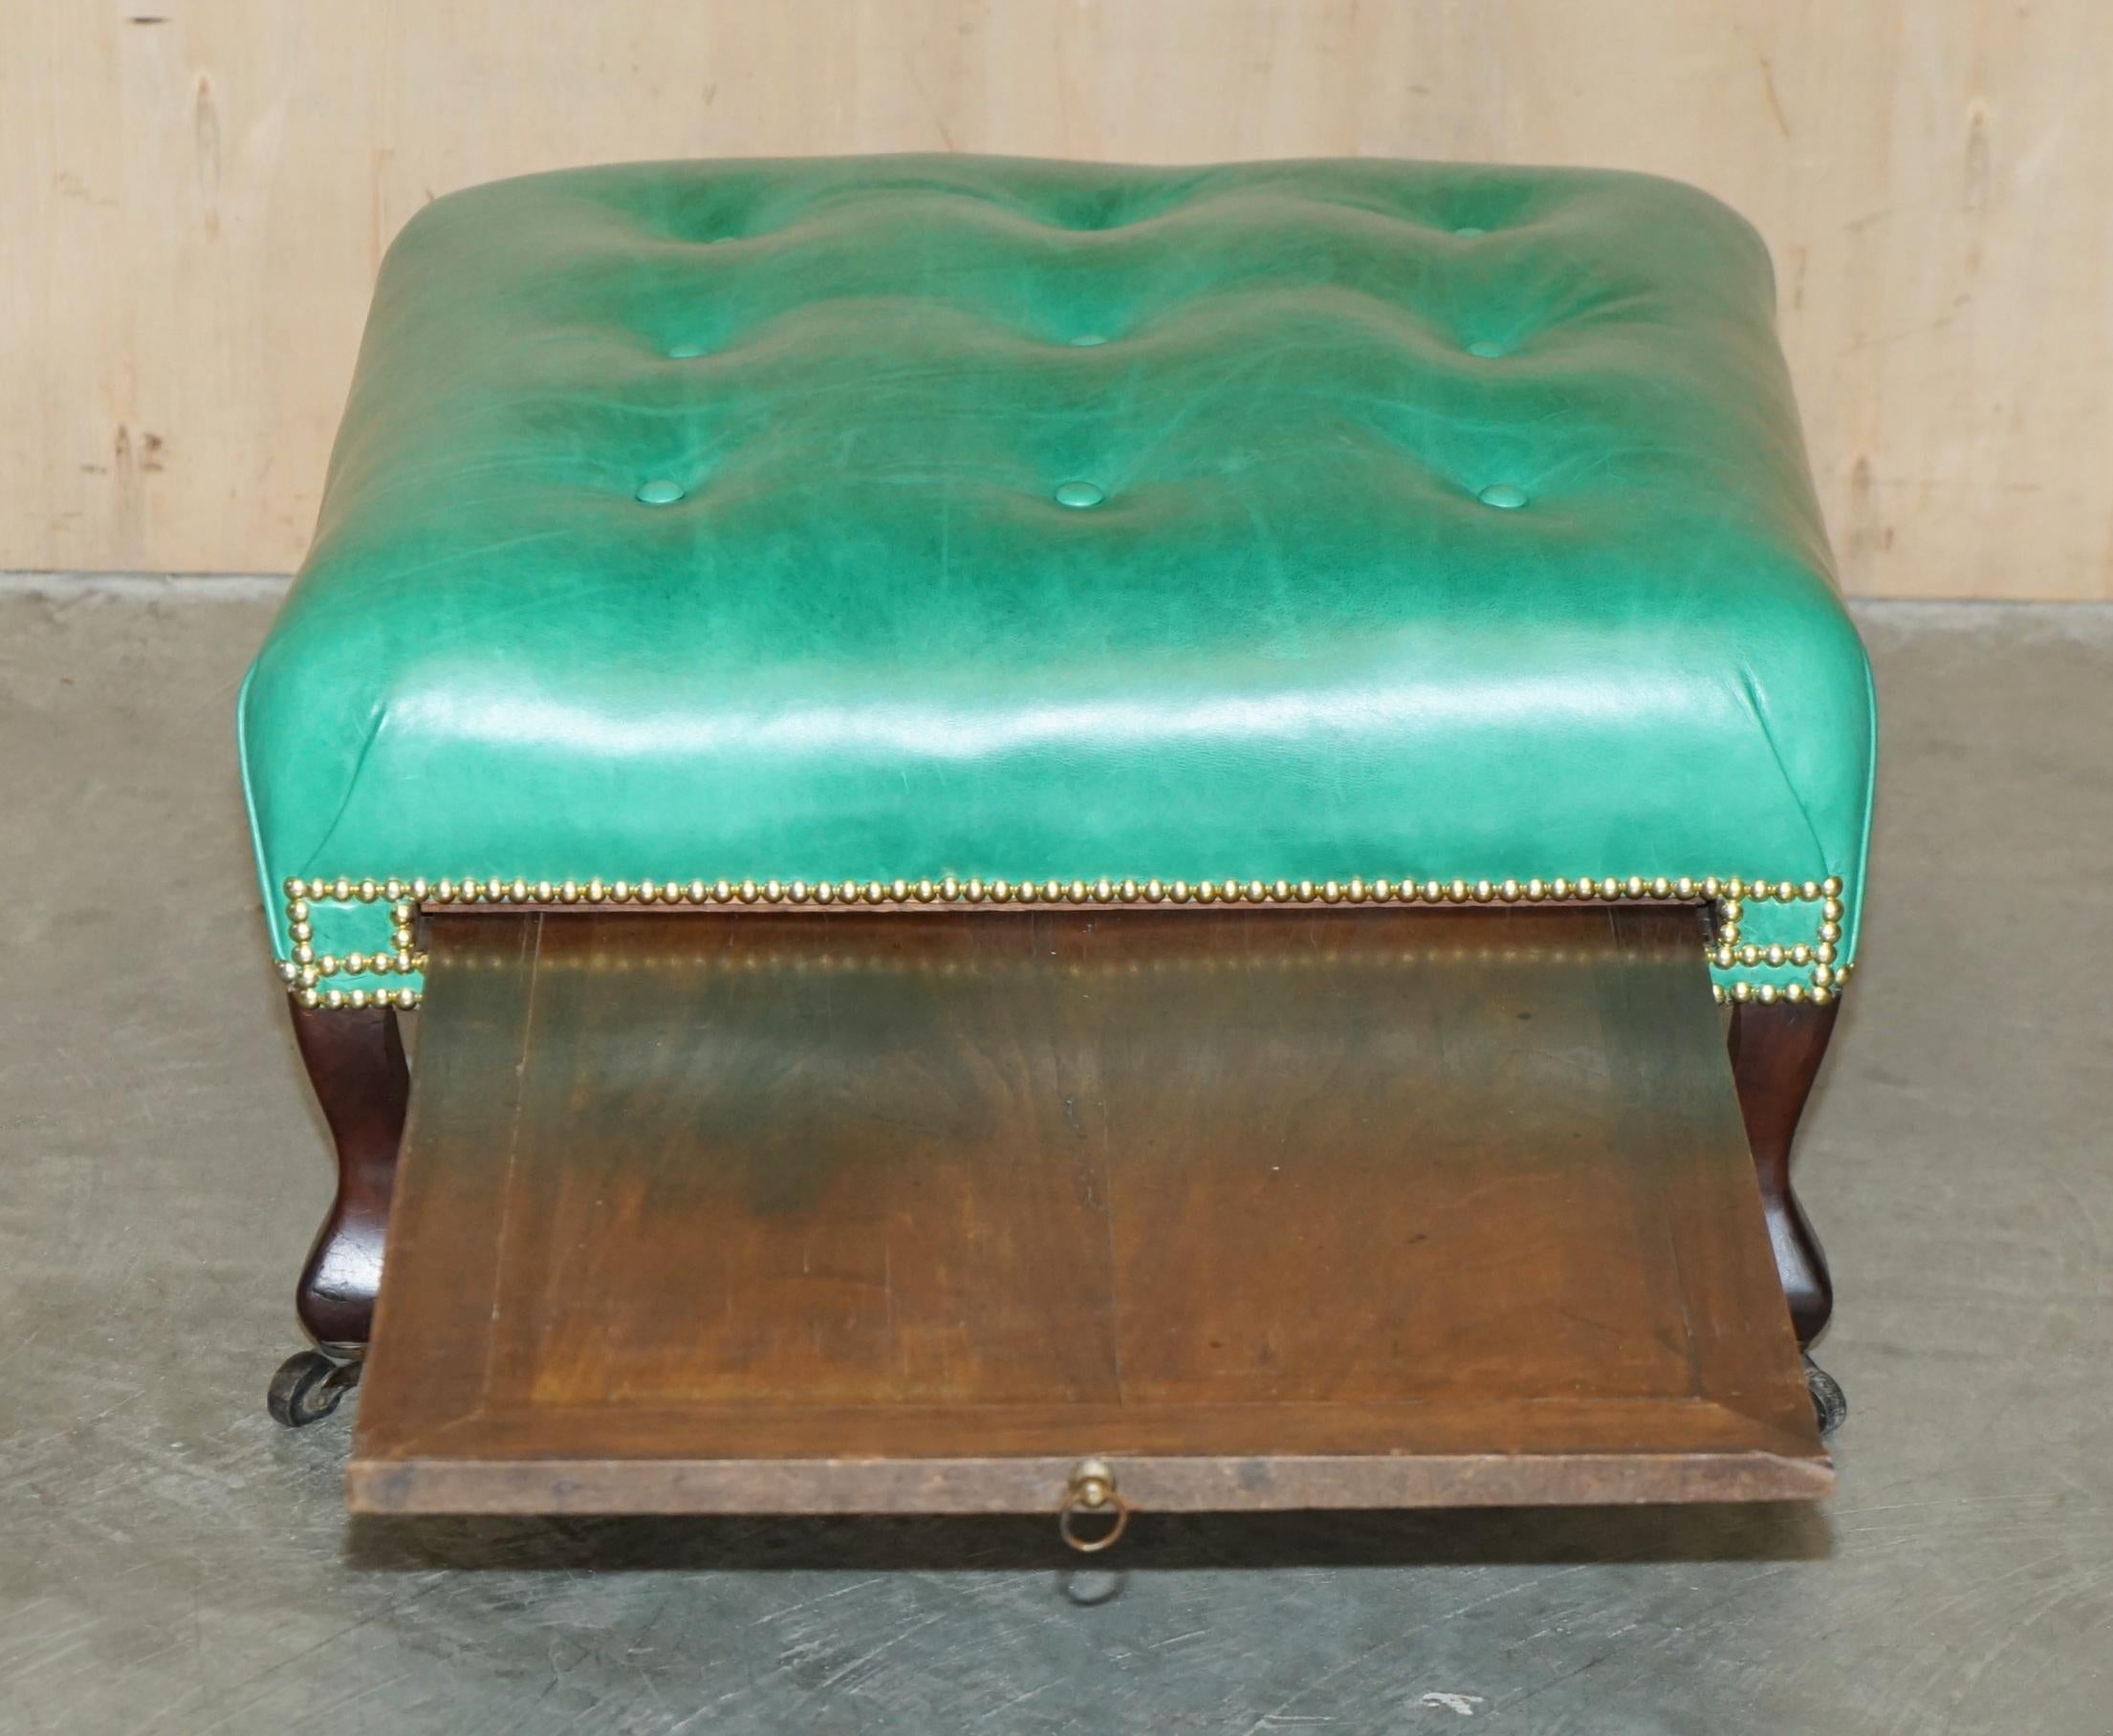 Georgian RARE ANTIQUE GEORGIAN 1760 CHESTERFIELD LEATHER FOOTSTOOL WiTH SLIP SERVING TRAY For Sale